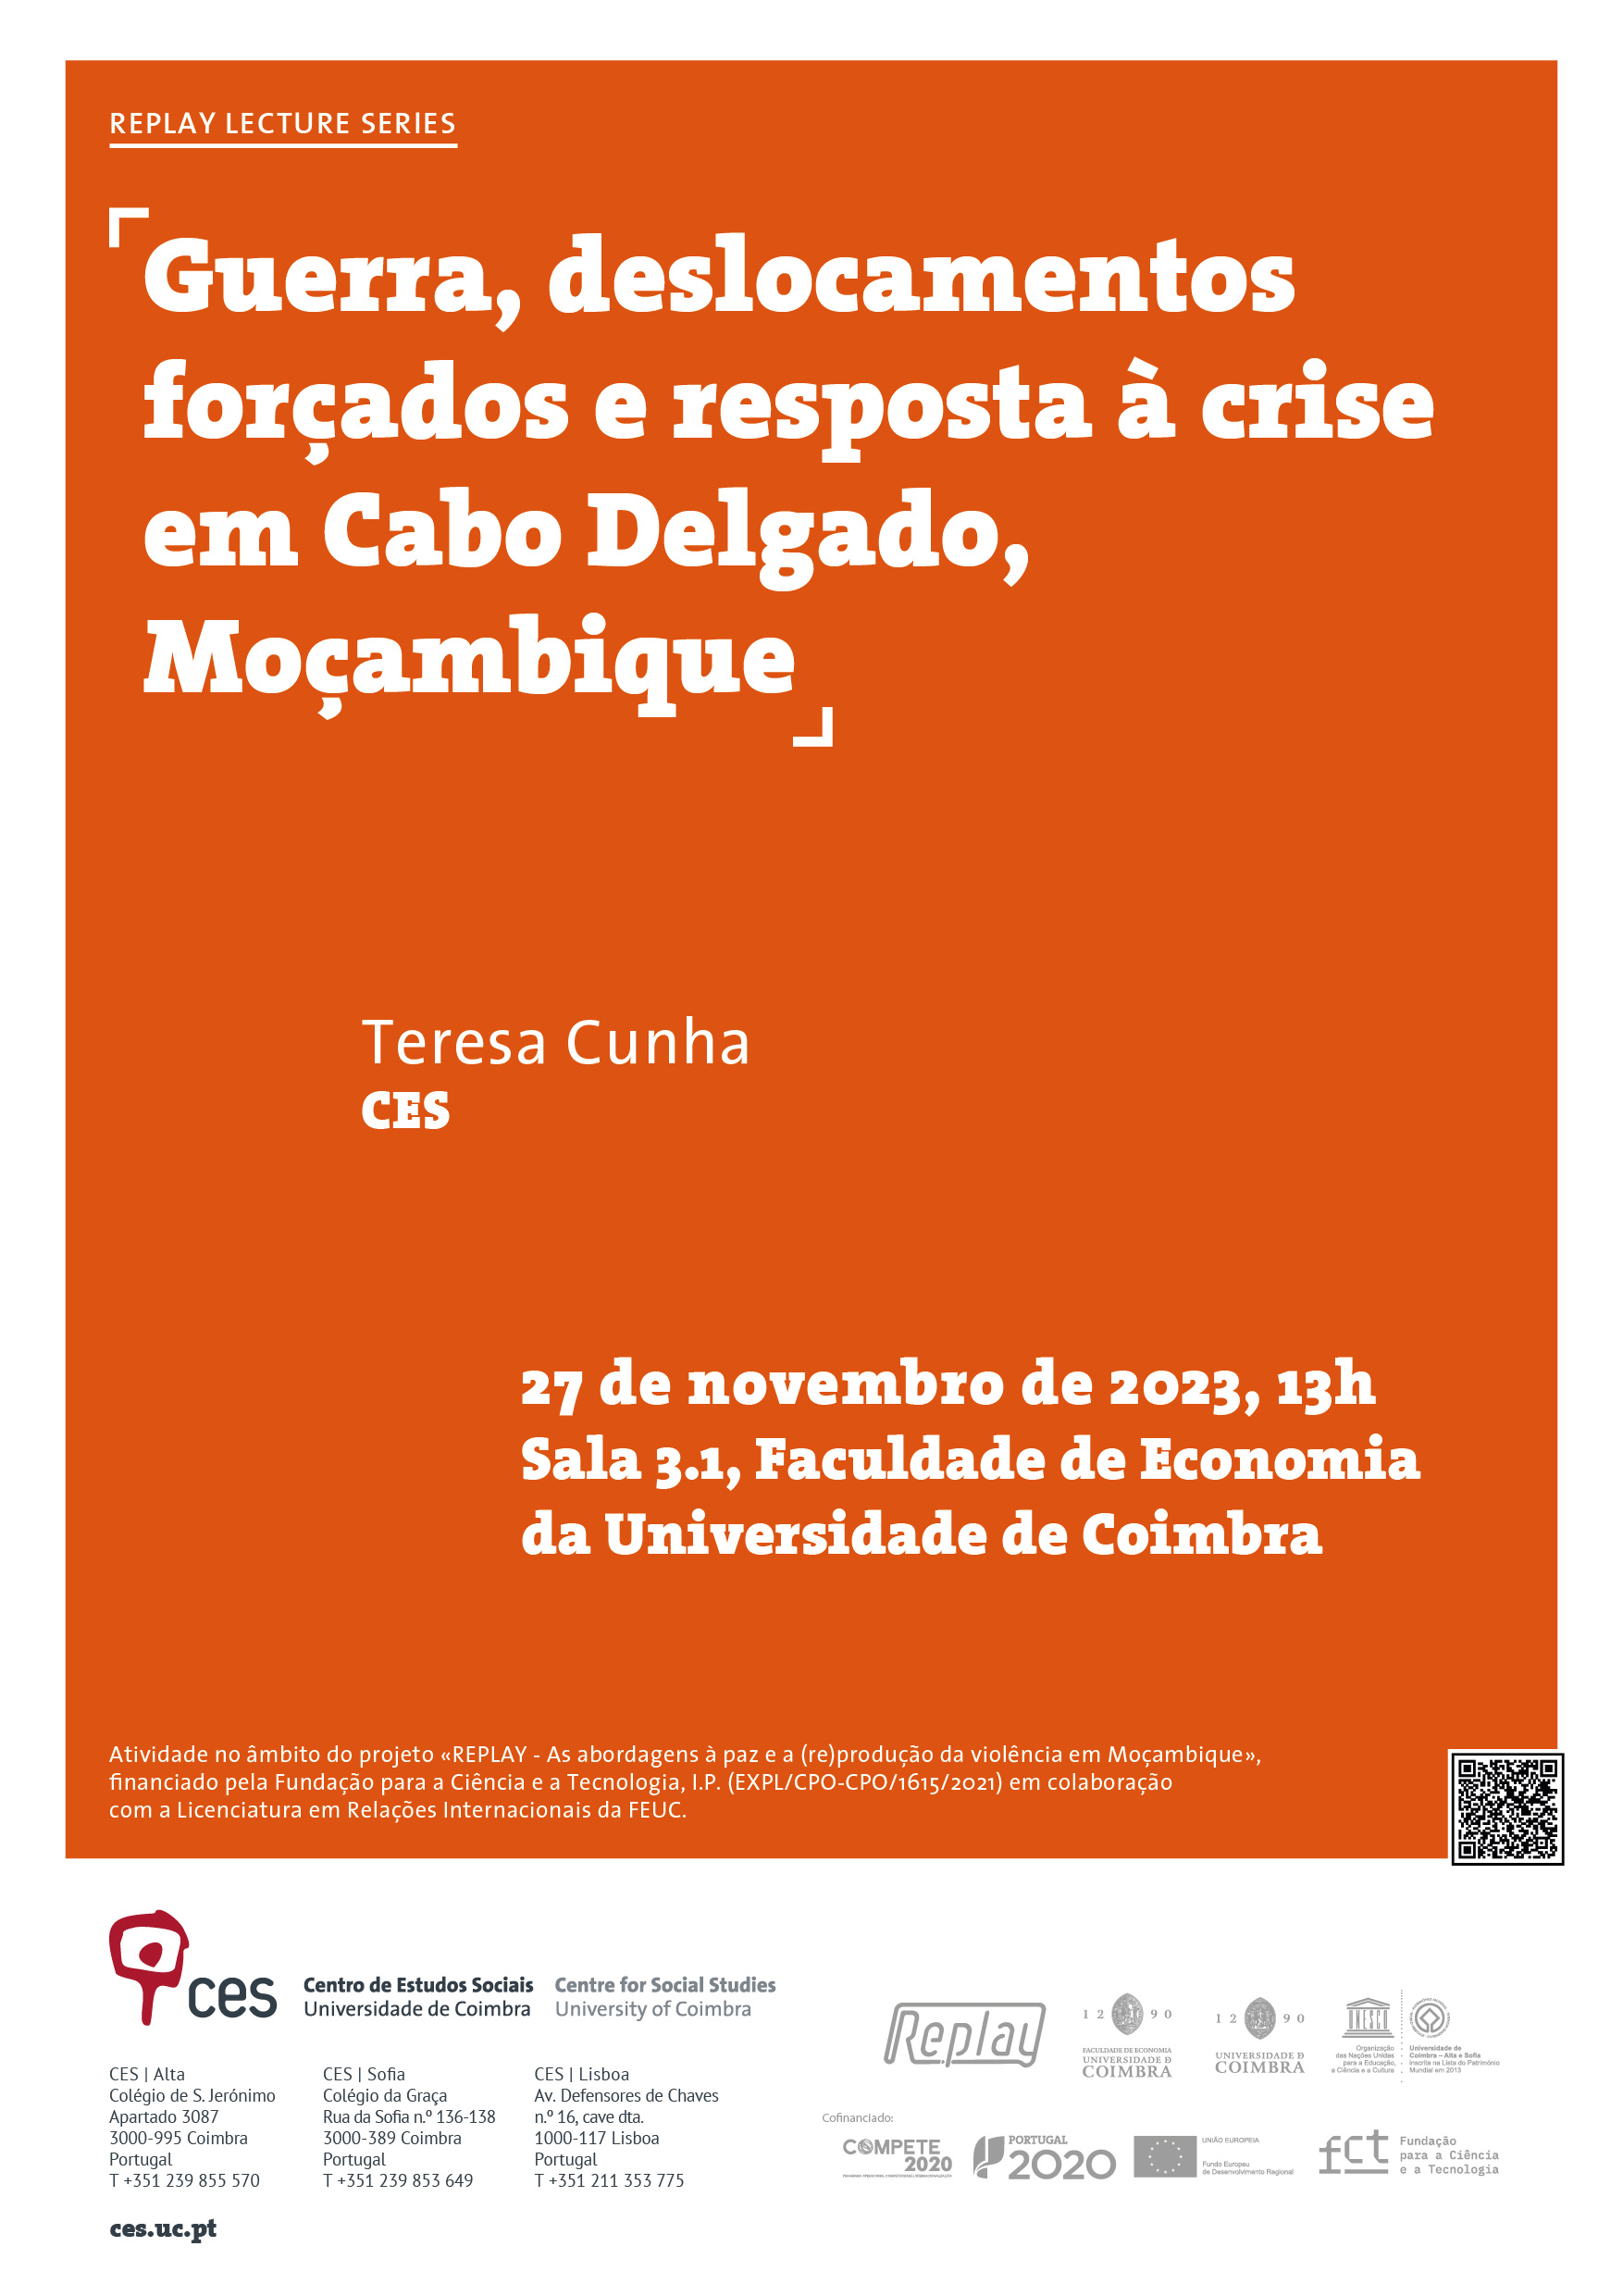 War, forced displacements and crisis response in Cabo Delgado, Mozambique<br />
	 <span id="edit_44626"><script>$(function() { $('#edit_44626').load( "/myces/user/editobj.php?tipo=evento&id=44626" ); });</script></span>